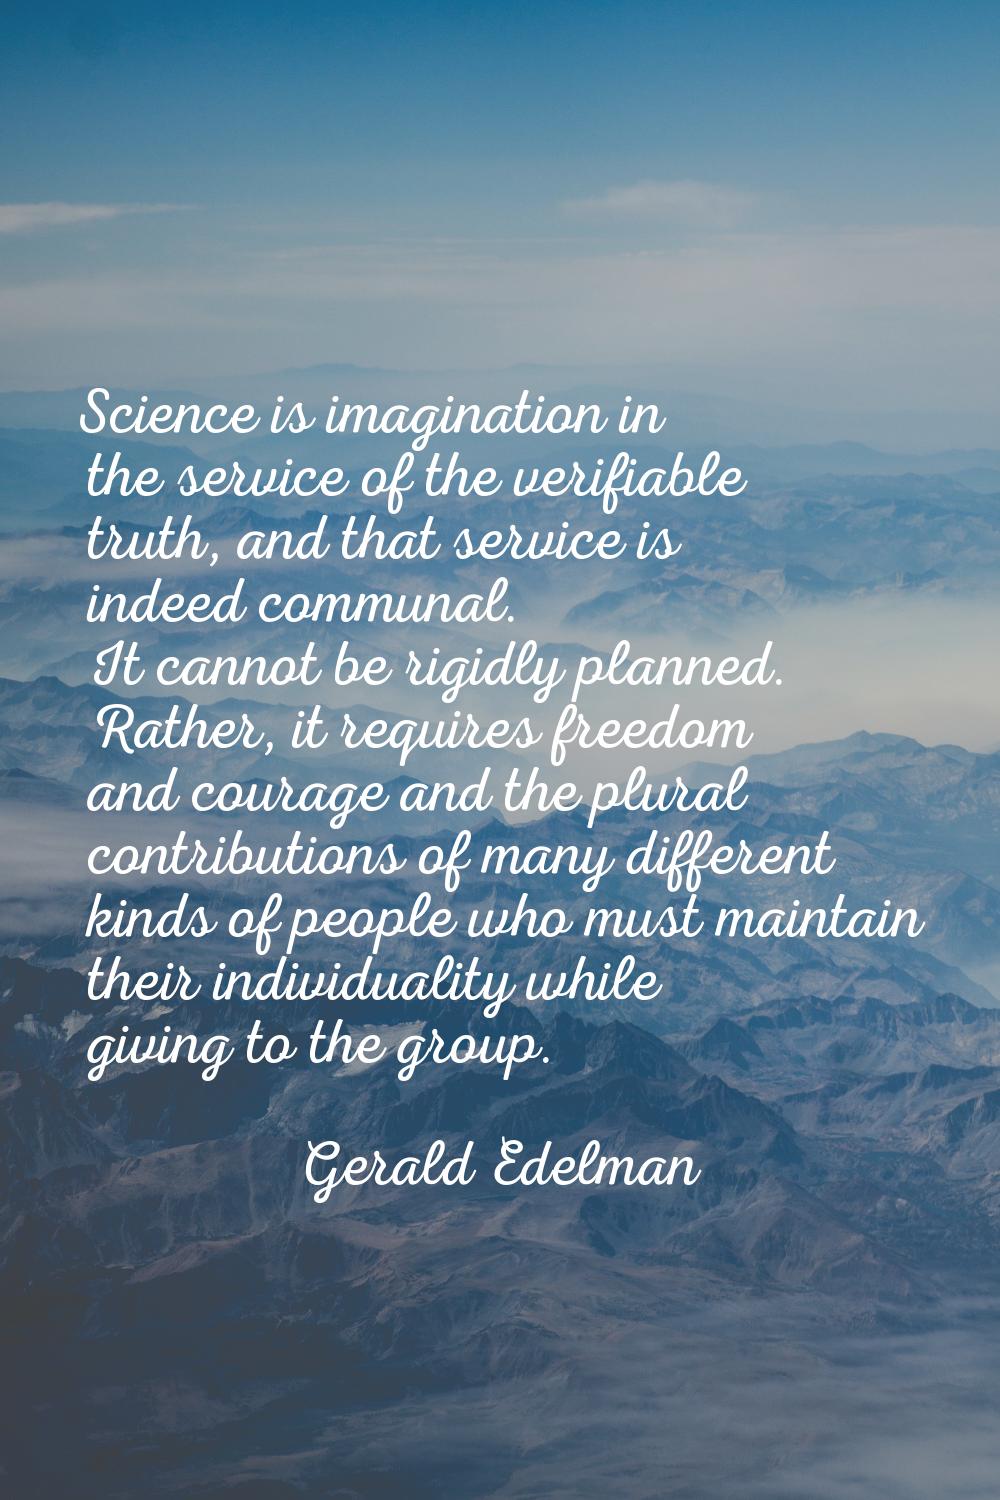 Science is imagination in the service of the verifiable truth, and that service is indeed communal.